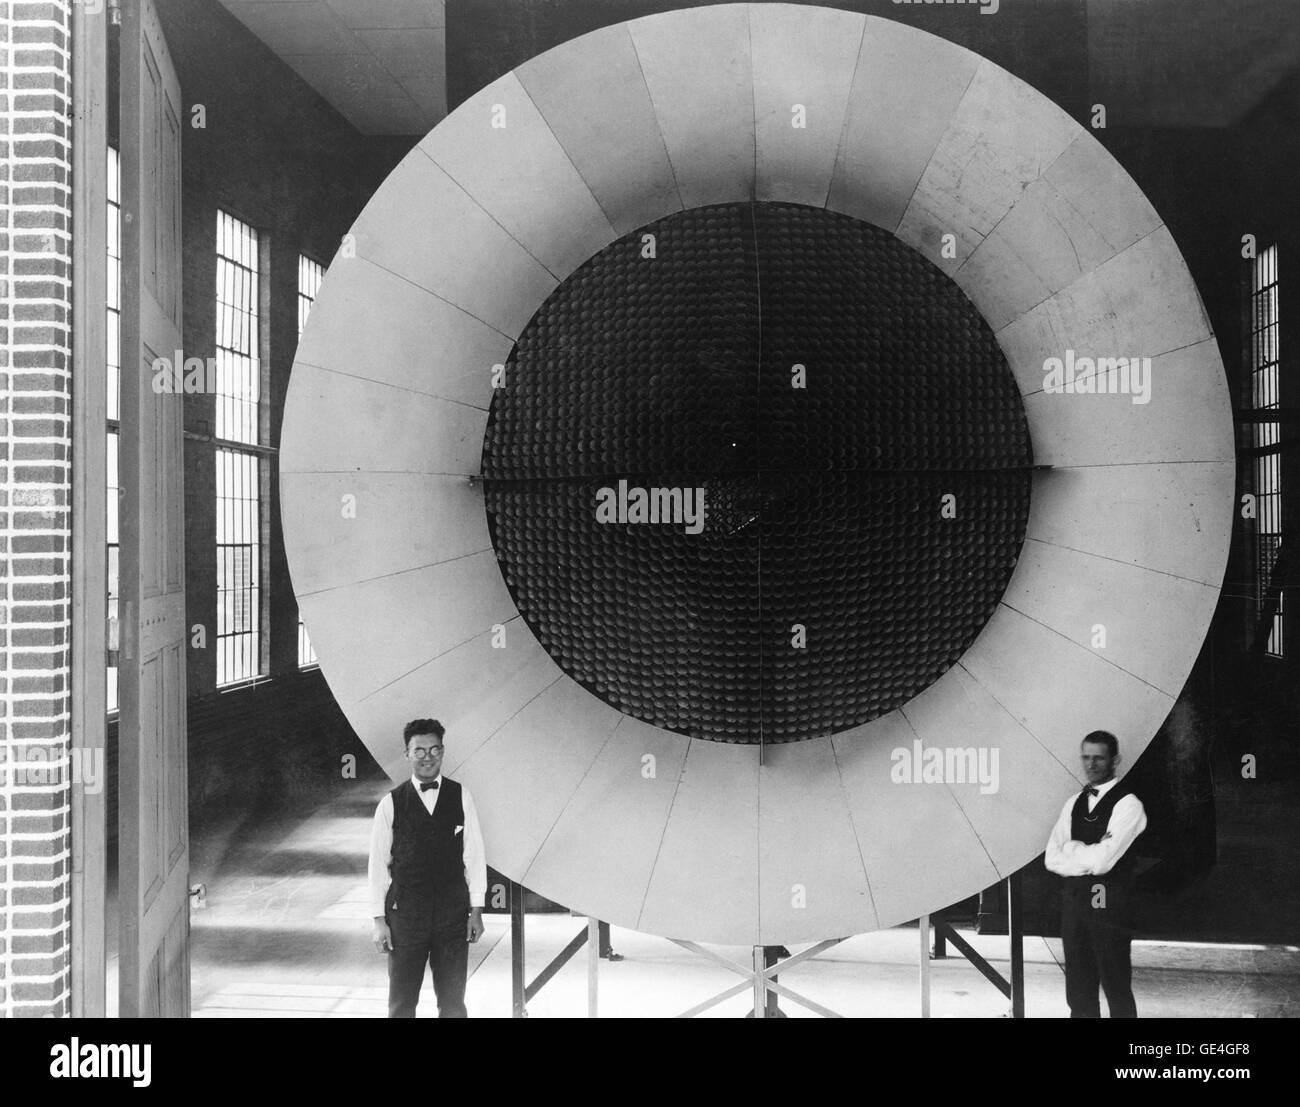 The honeycombed, screened center of this open-circuit air intake for Langley's first wind tunnel insured a steady, nonturbulent flow of air. Two mechanics pose near the entrance end of the actual tunnel, where air was pulled into the test section through a honeycomb arrangement to smoothen the flow. Stock Photo